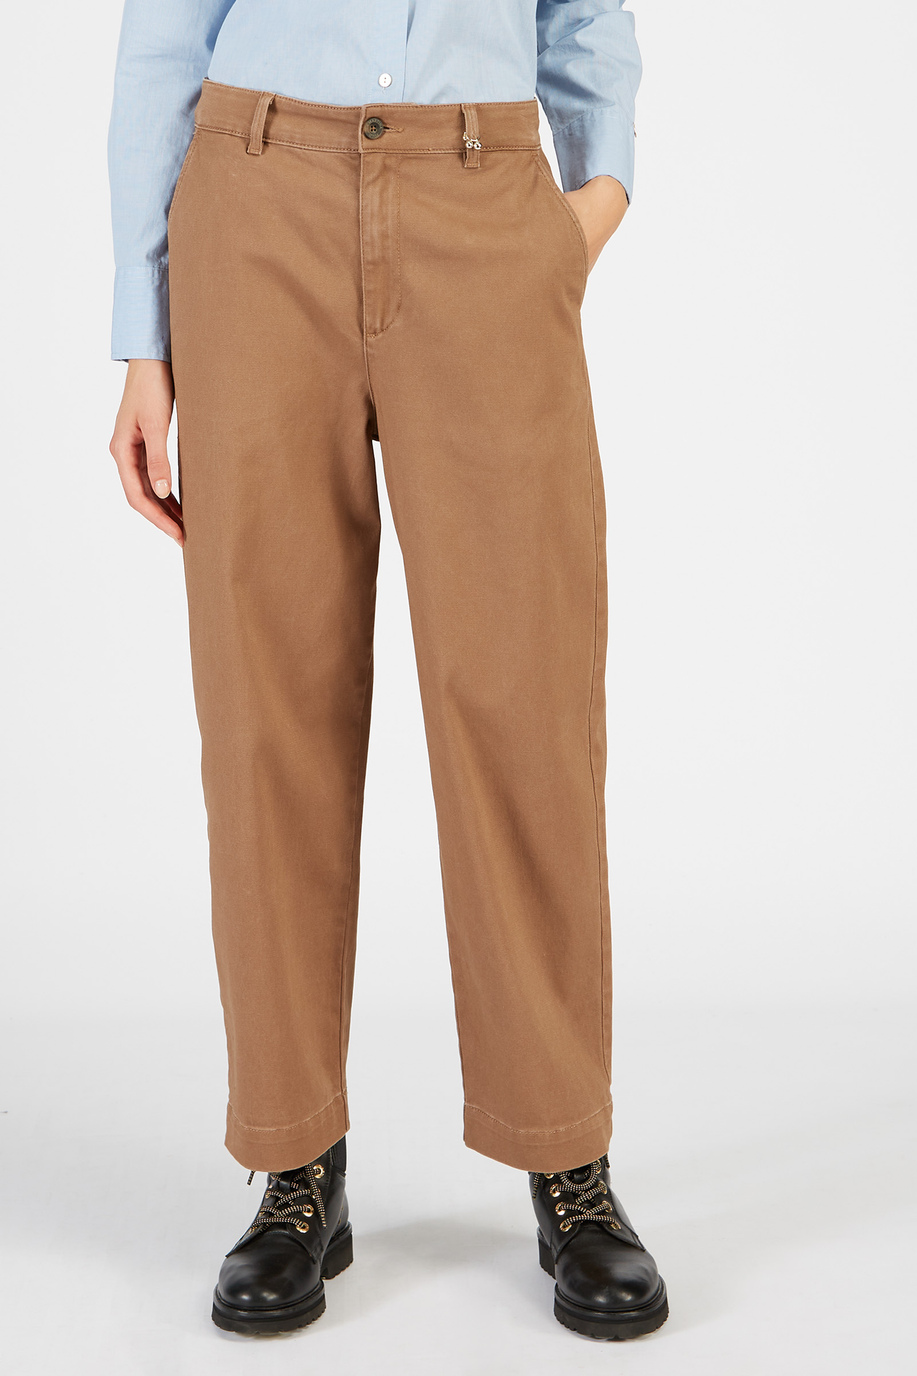 Women’s high-waisted trousers with narrow bottom - Autumn style | La Martina - Official Online Shop